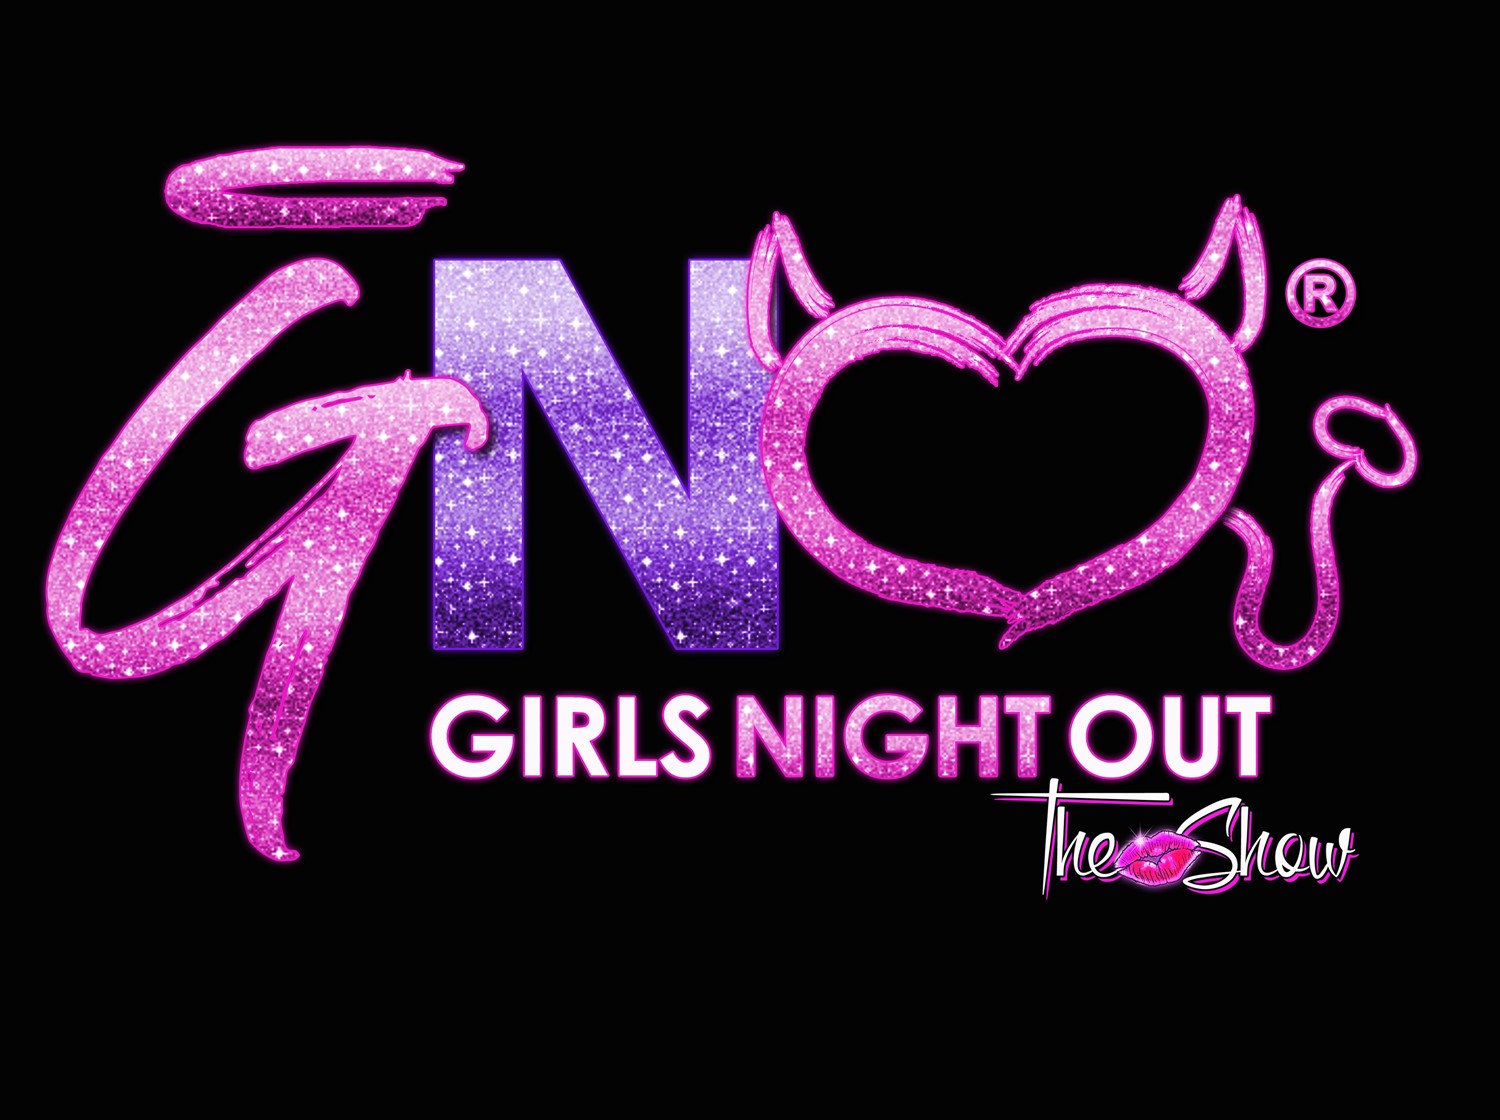 Frio Grill (21+) Cypress, TX on May 24, 20:00@Fri Grill - Buy tickets and Get information on Girls Night Out the Show tickets.girlsnightouttheshow.com